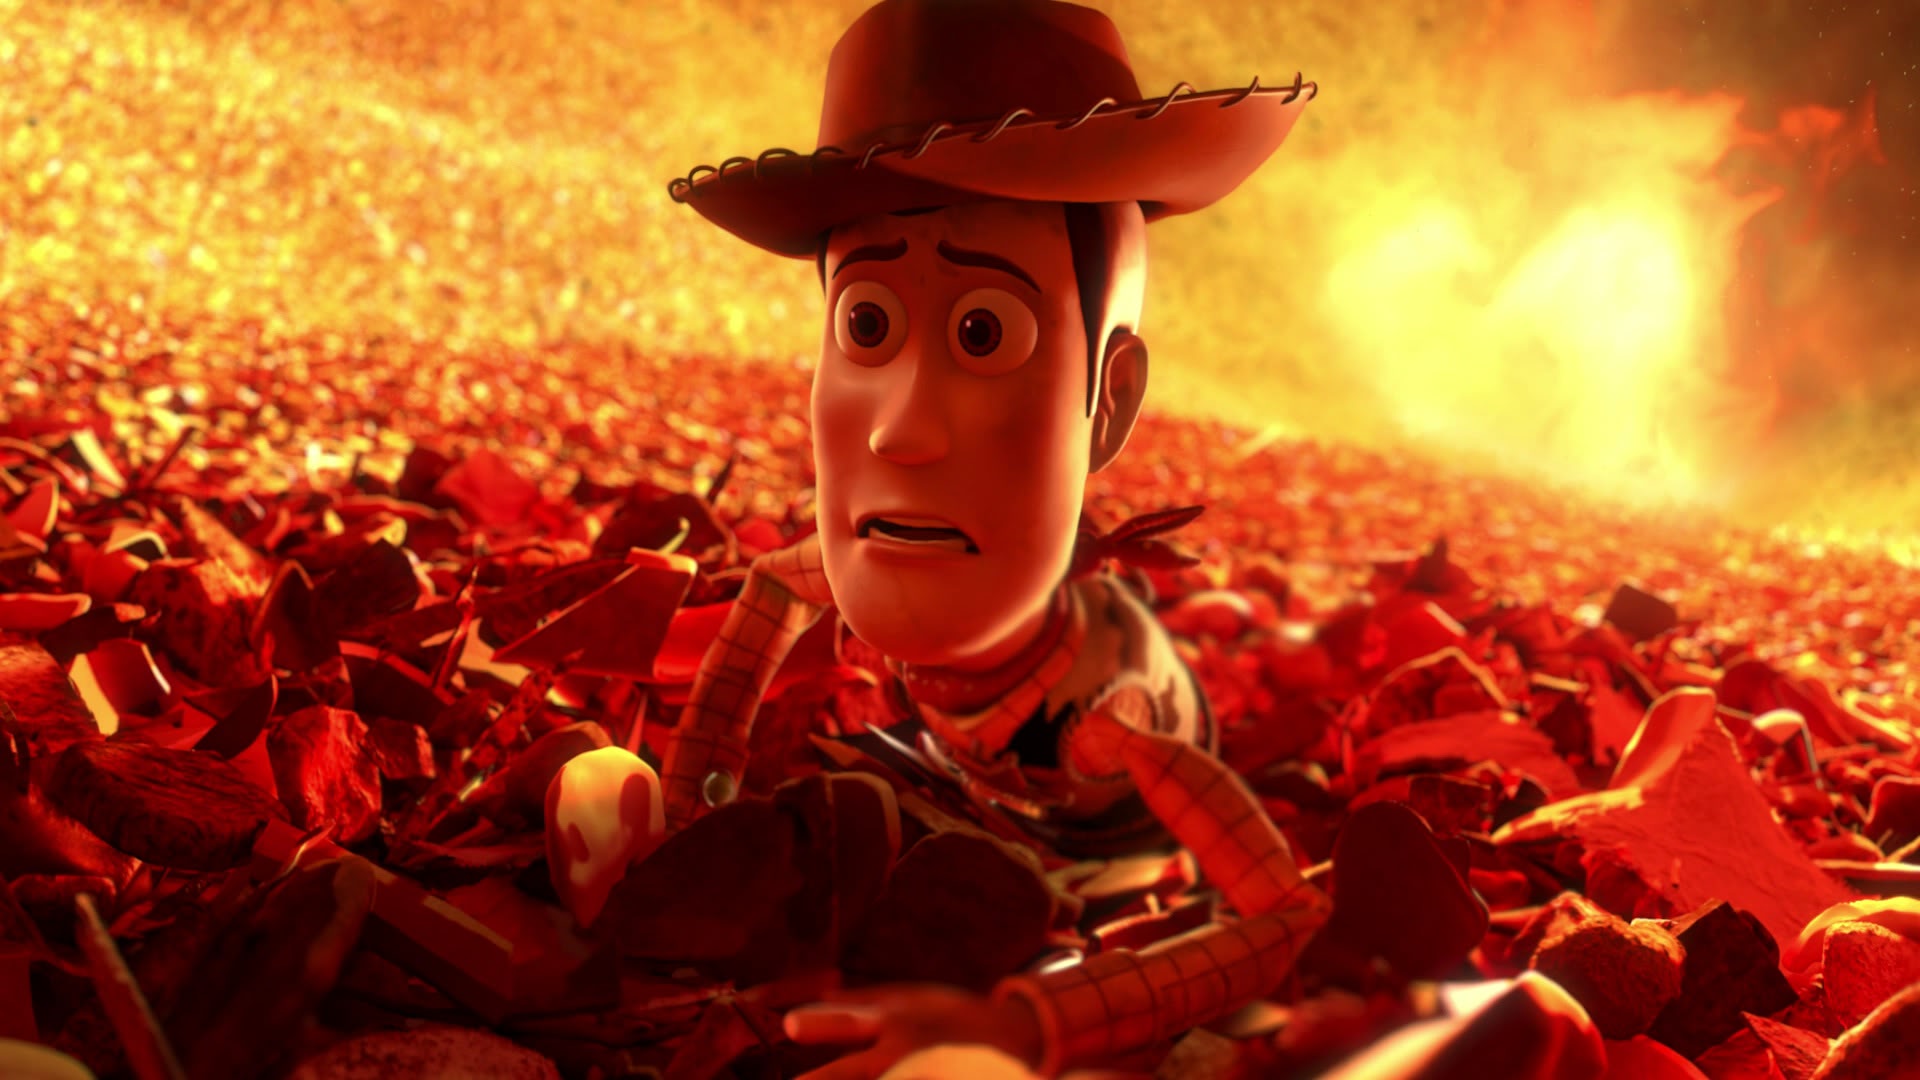 Woody in Toy Story 3